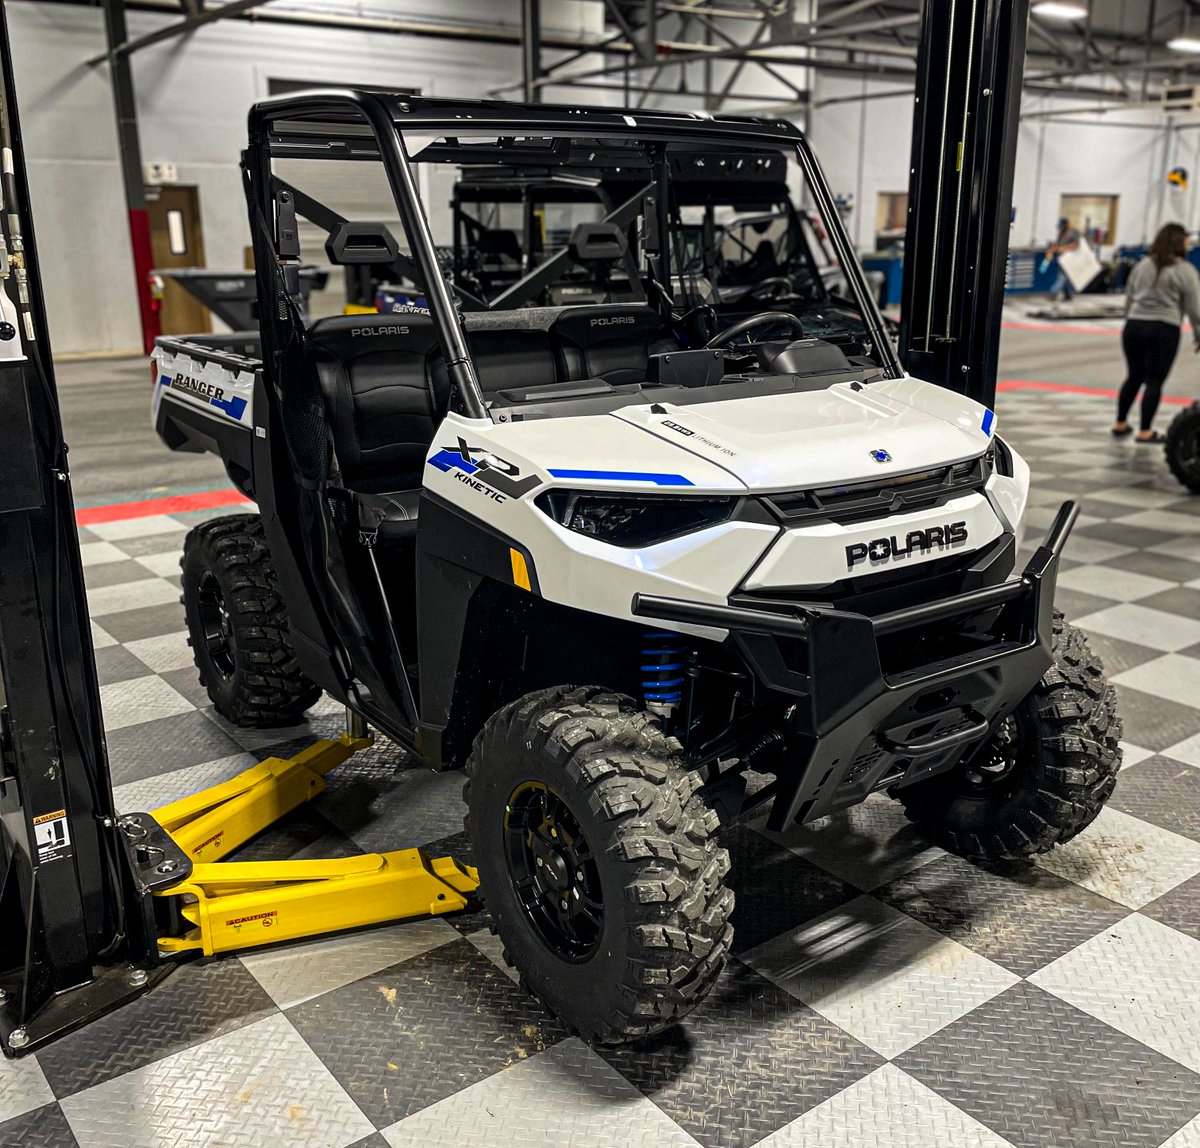 🔌So stoked to get this unit in the shop! The @PolarisORV #RangerXP #KINETIC is here! ⚡😎 The attention to detail with this unit is some of the best we've seen from #Polaris, with the #pearlescent plastics, incredible dash cluster, the headlights, & much more. 🔥#LetsGooo #SATV